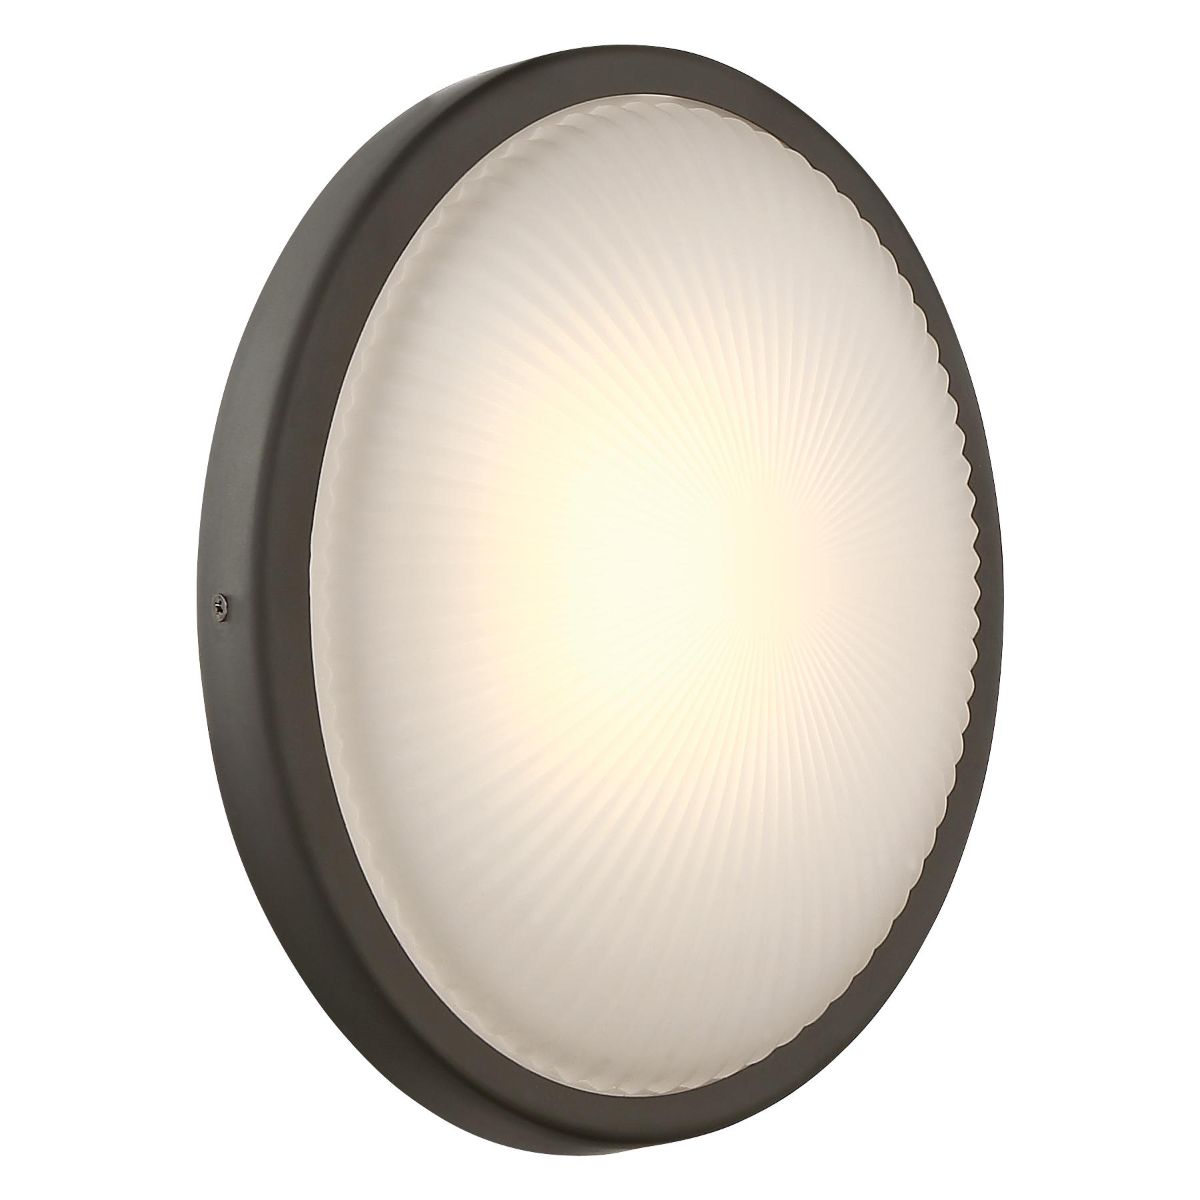 Radiun 8 in. LED Outdoor Wall Sconce